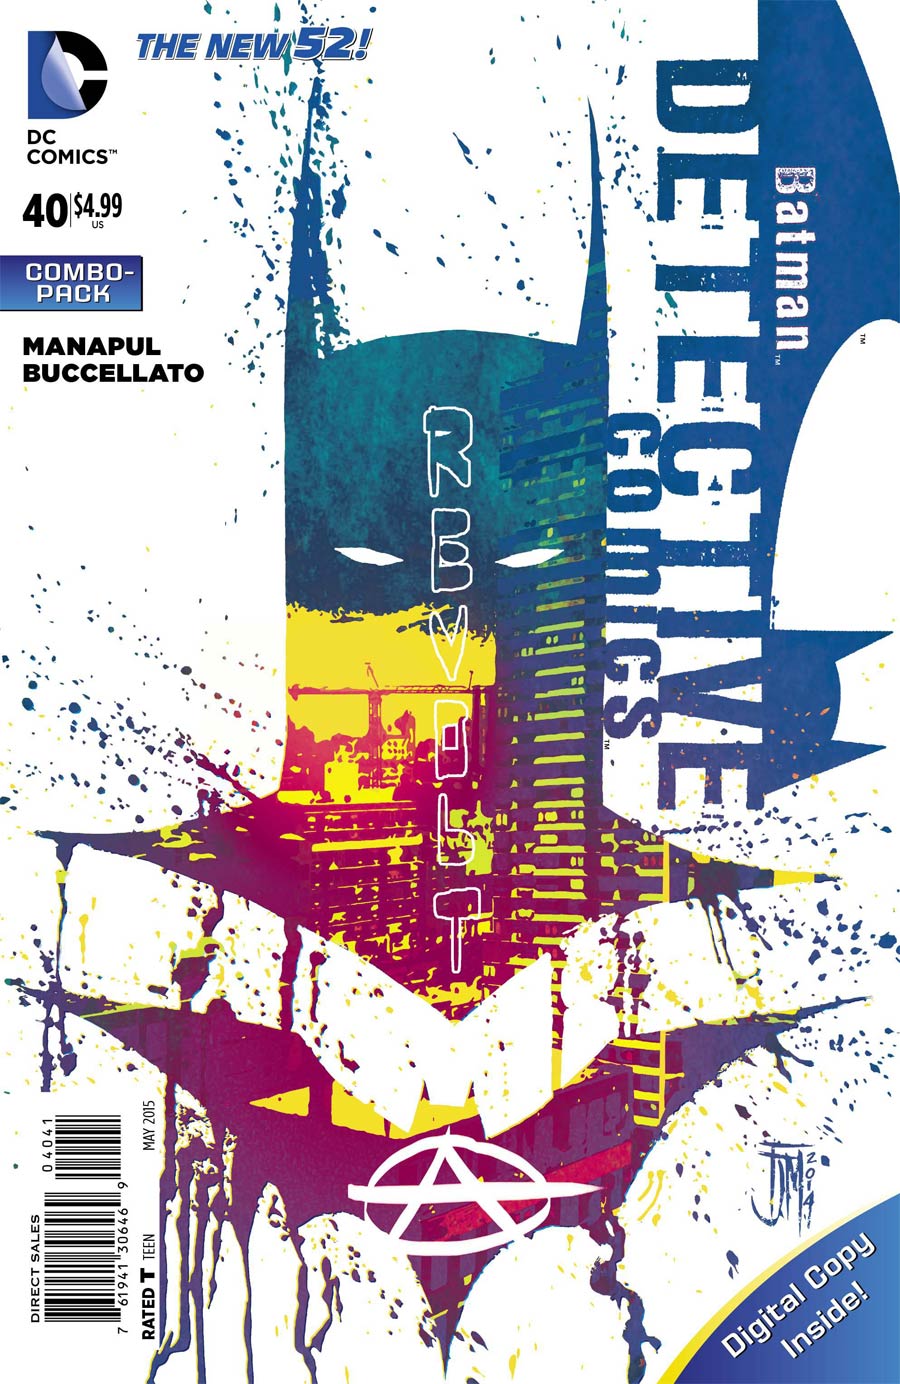 Detective Comics Vol 2 #40 Cover D Combo Pack Without Polybag